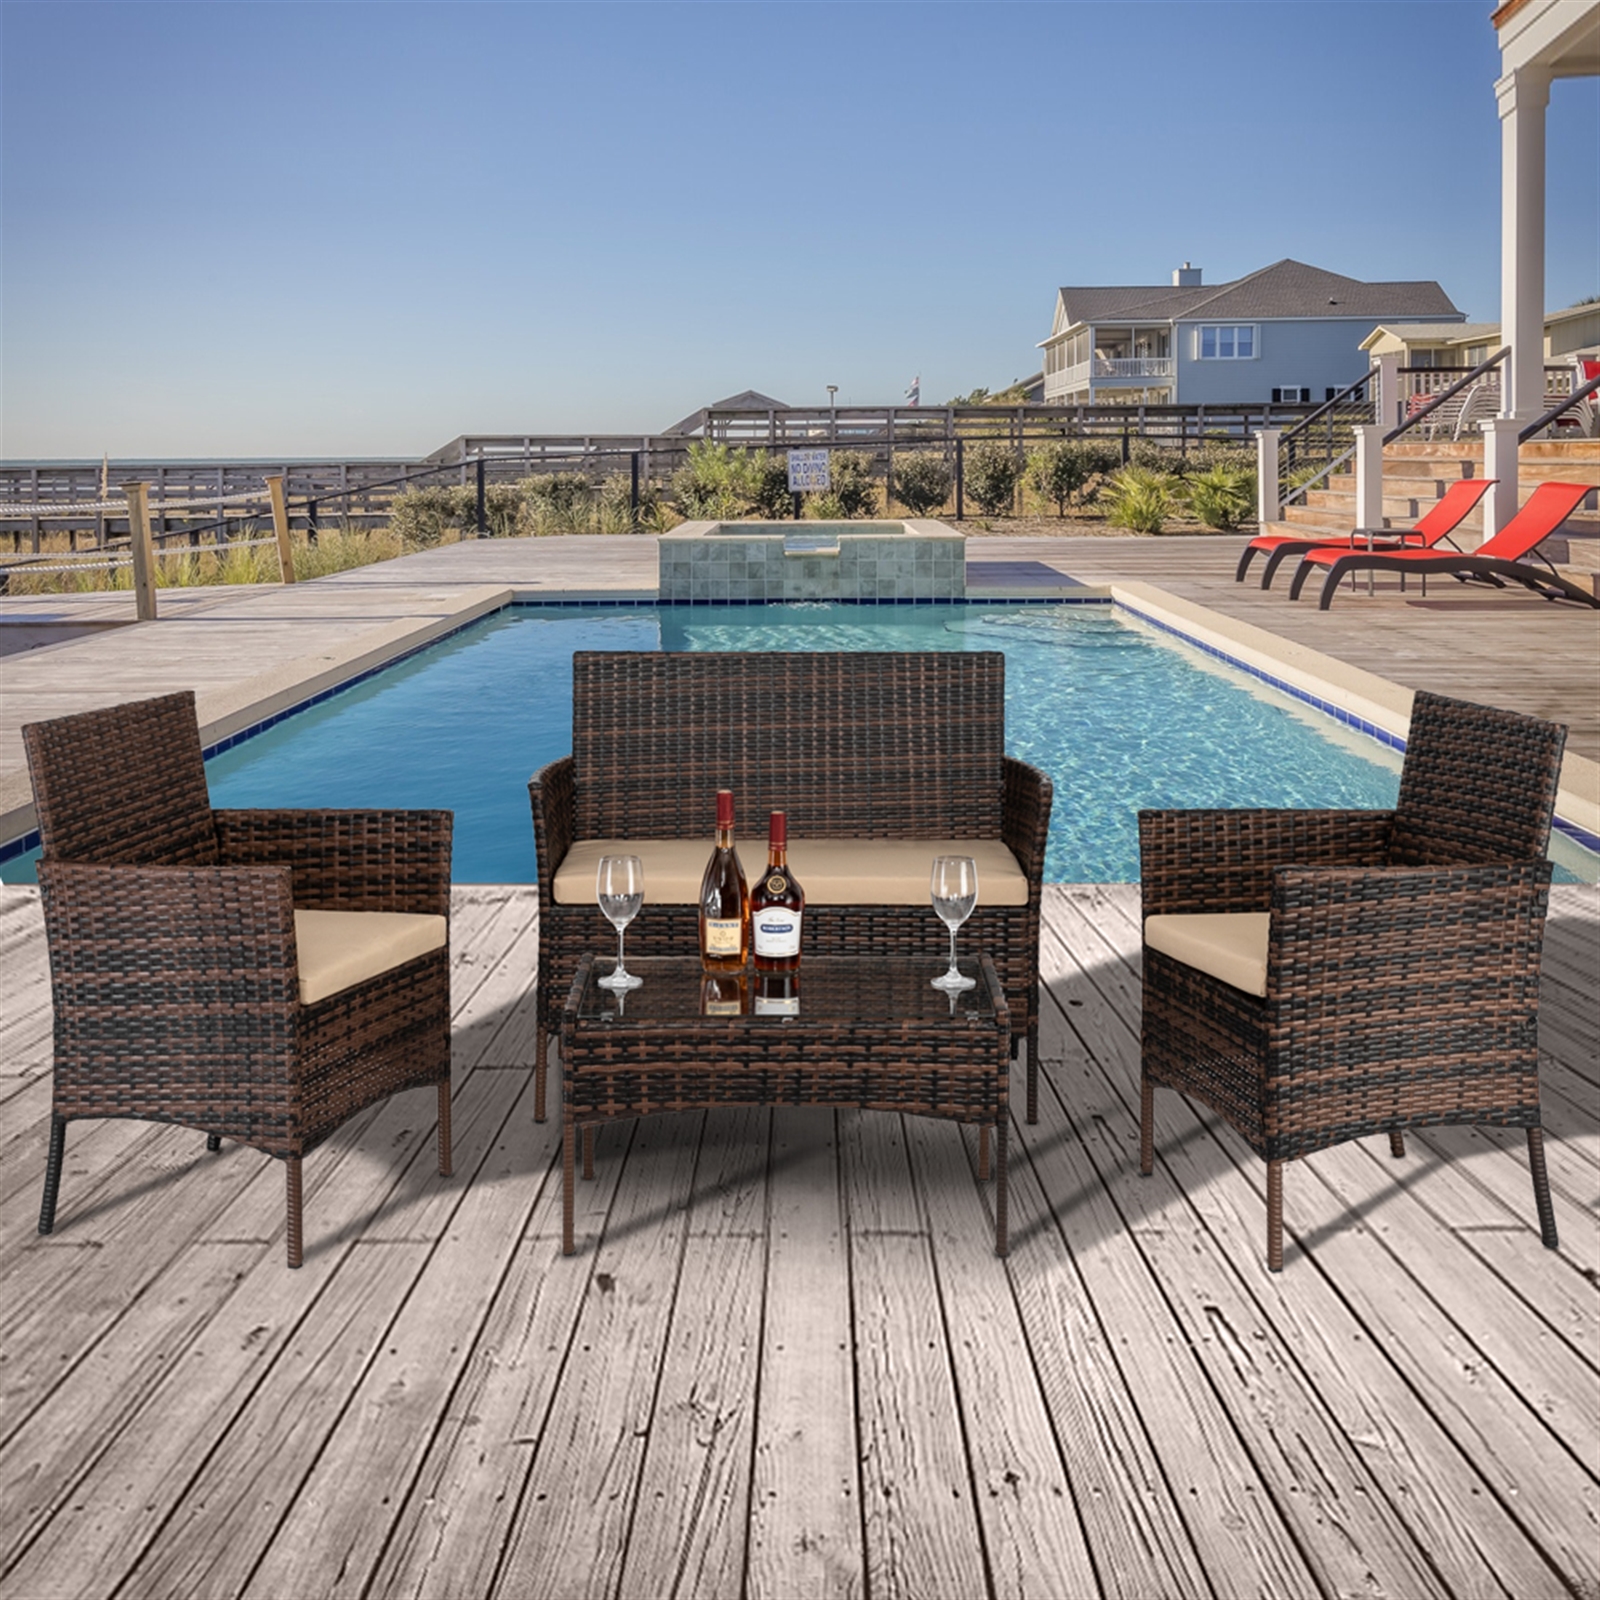 4 Piece Bistro Patio Set, Outdoor Patio Furniture Sets with Glass Dining Table, Loveseat & 2 Cushioned Chairs, Brown Conversation Sets with Coffee Table for Backyard, Porch, Garden, Poolside, L5089 - image 2 of 9